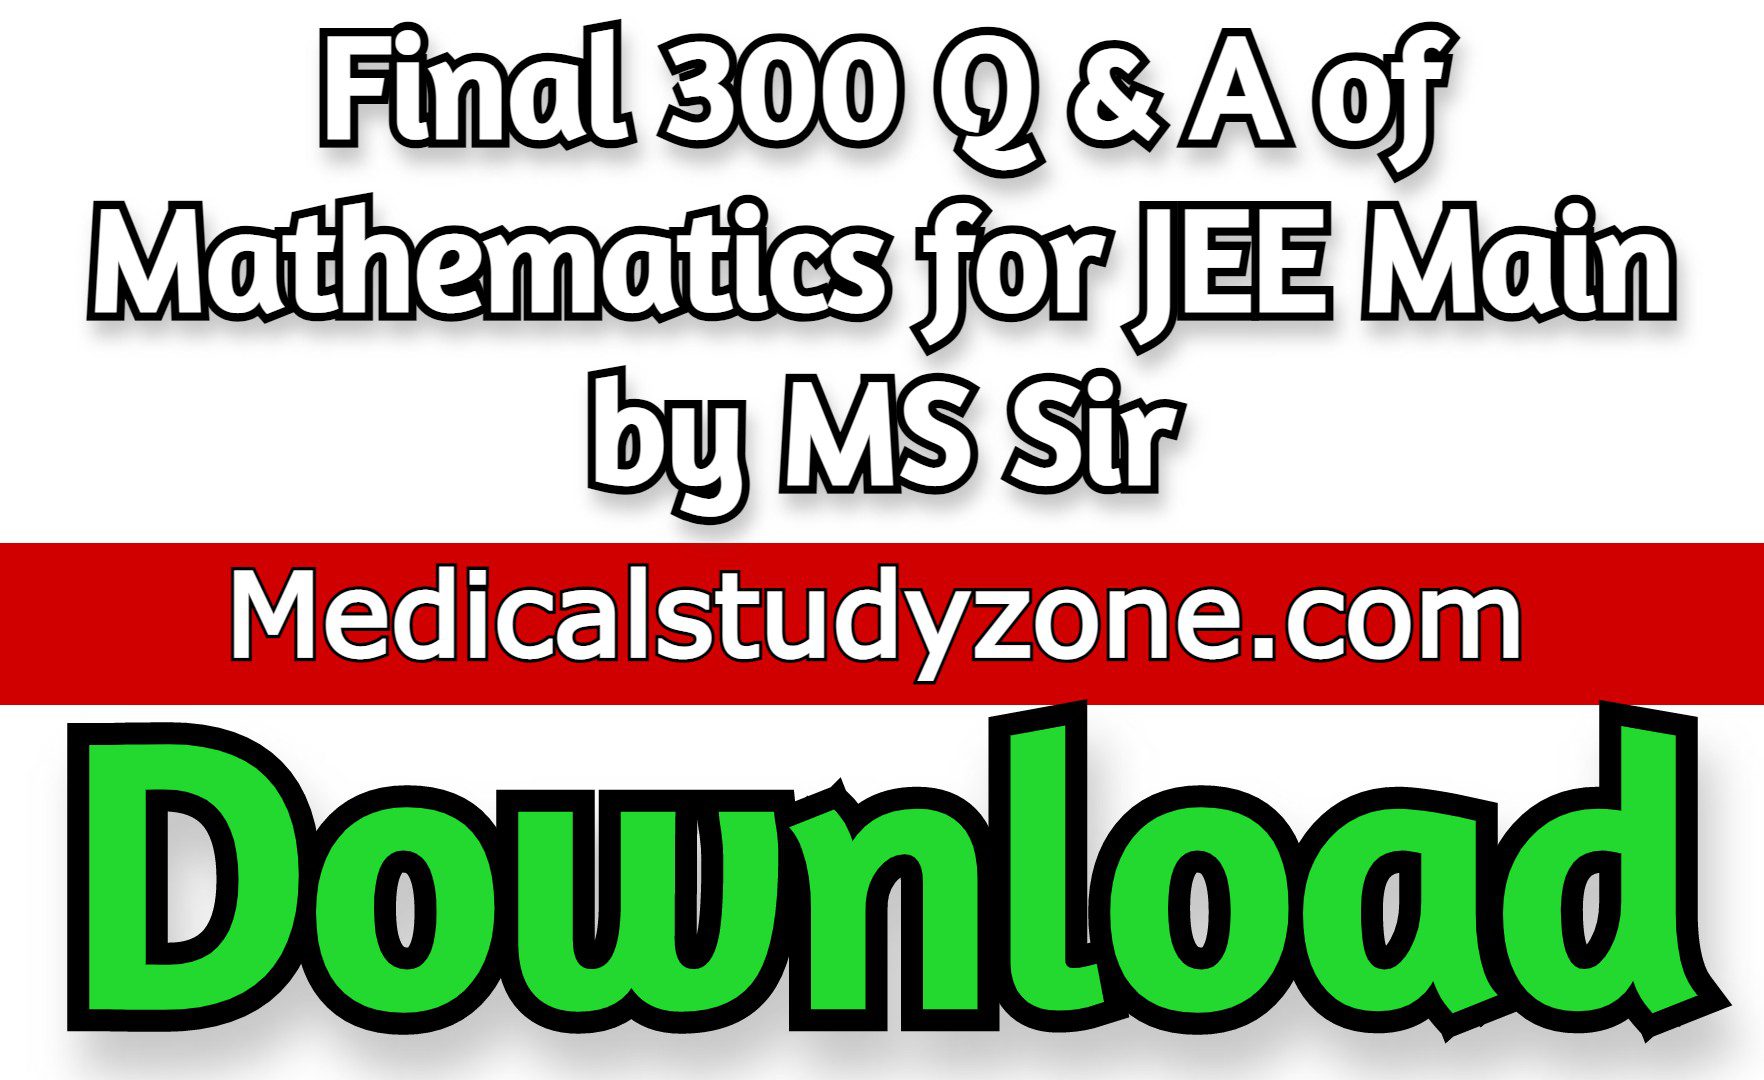 Download Final 300 Q & A of Mathematics for JEE Main by MS Sir Free